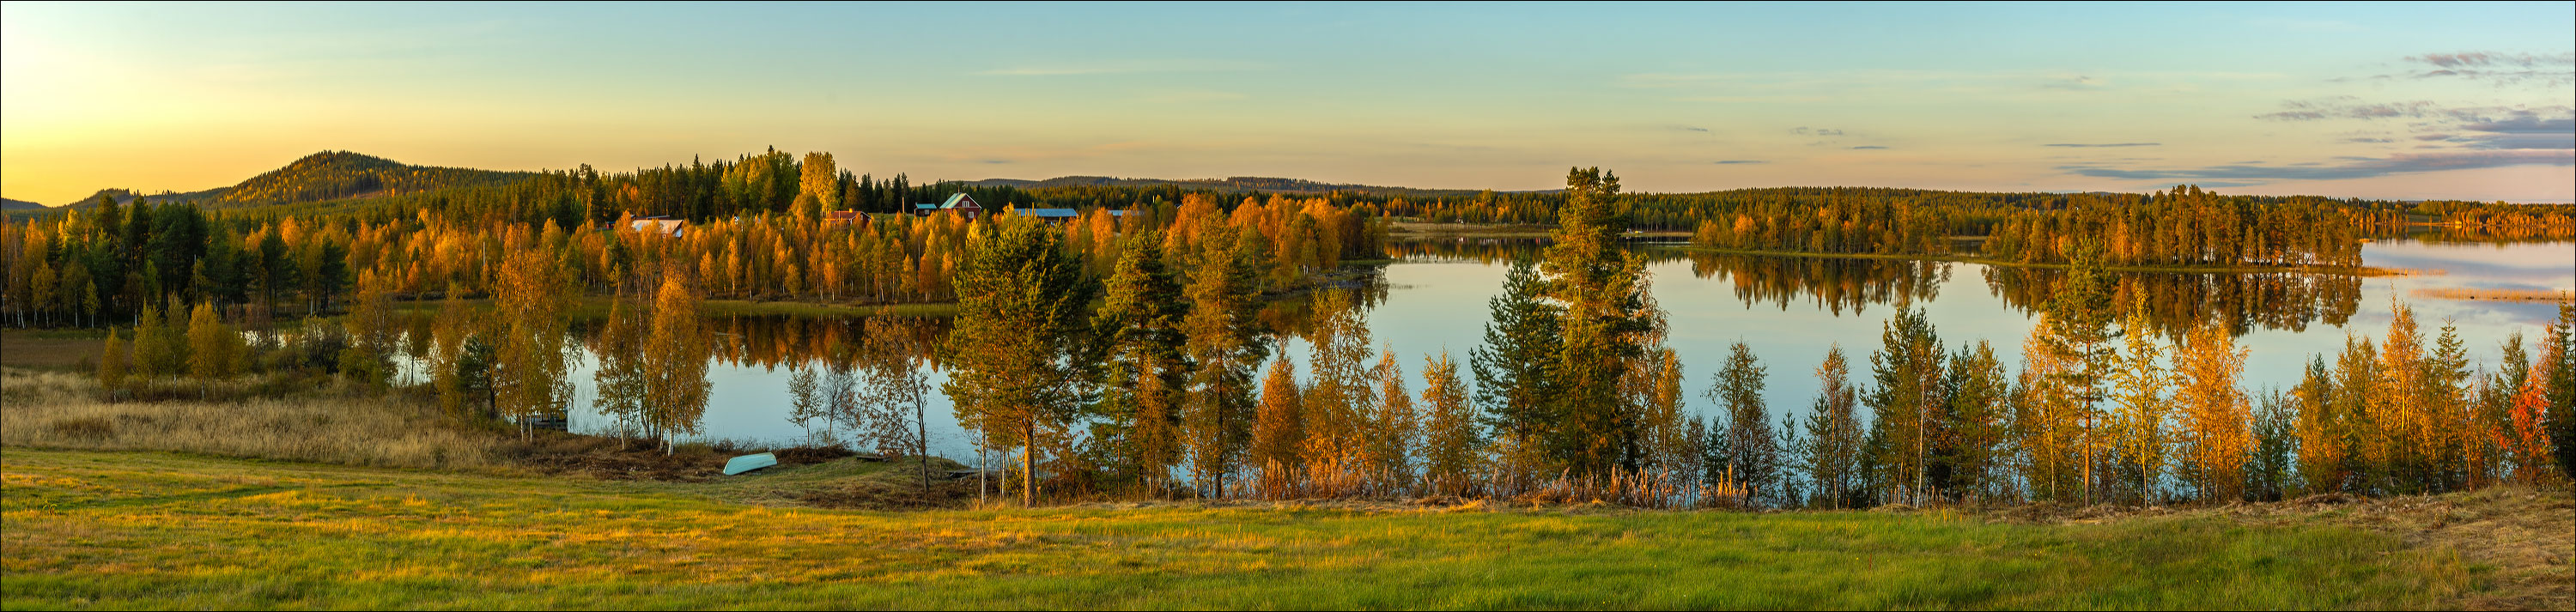 °°° Herbst in Lappland °°°